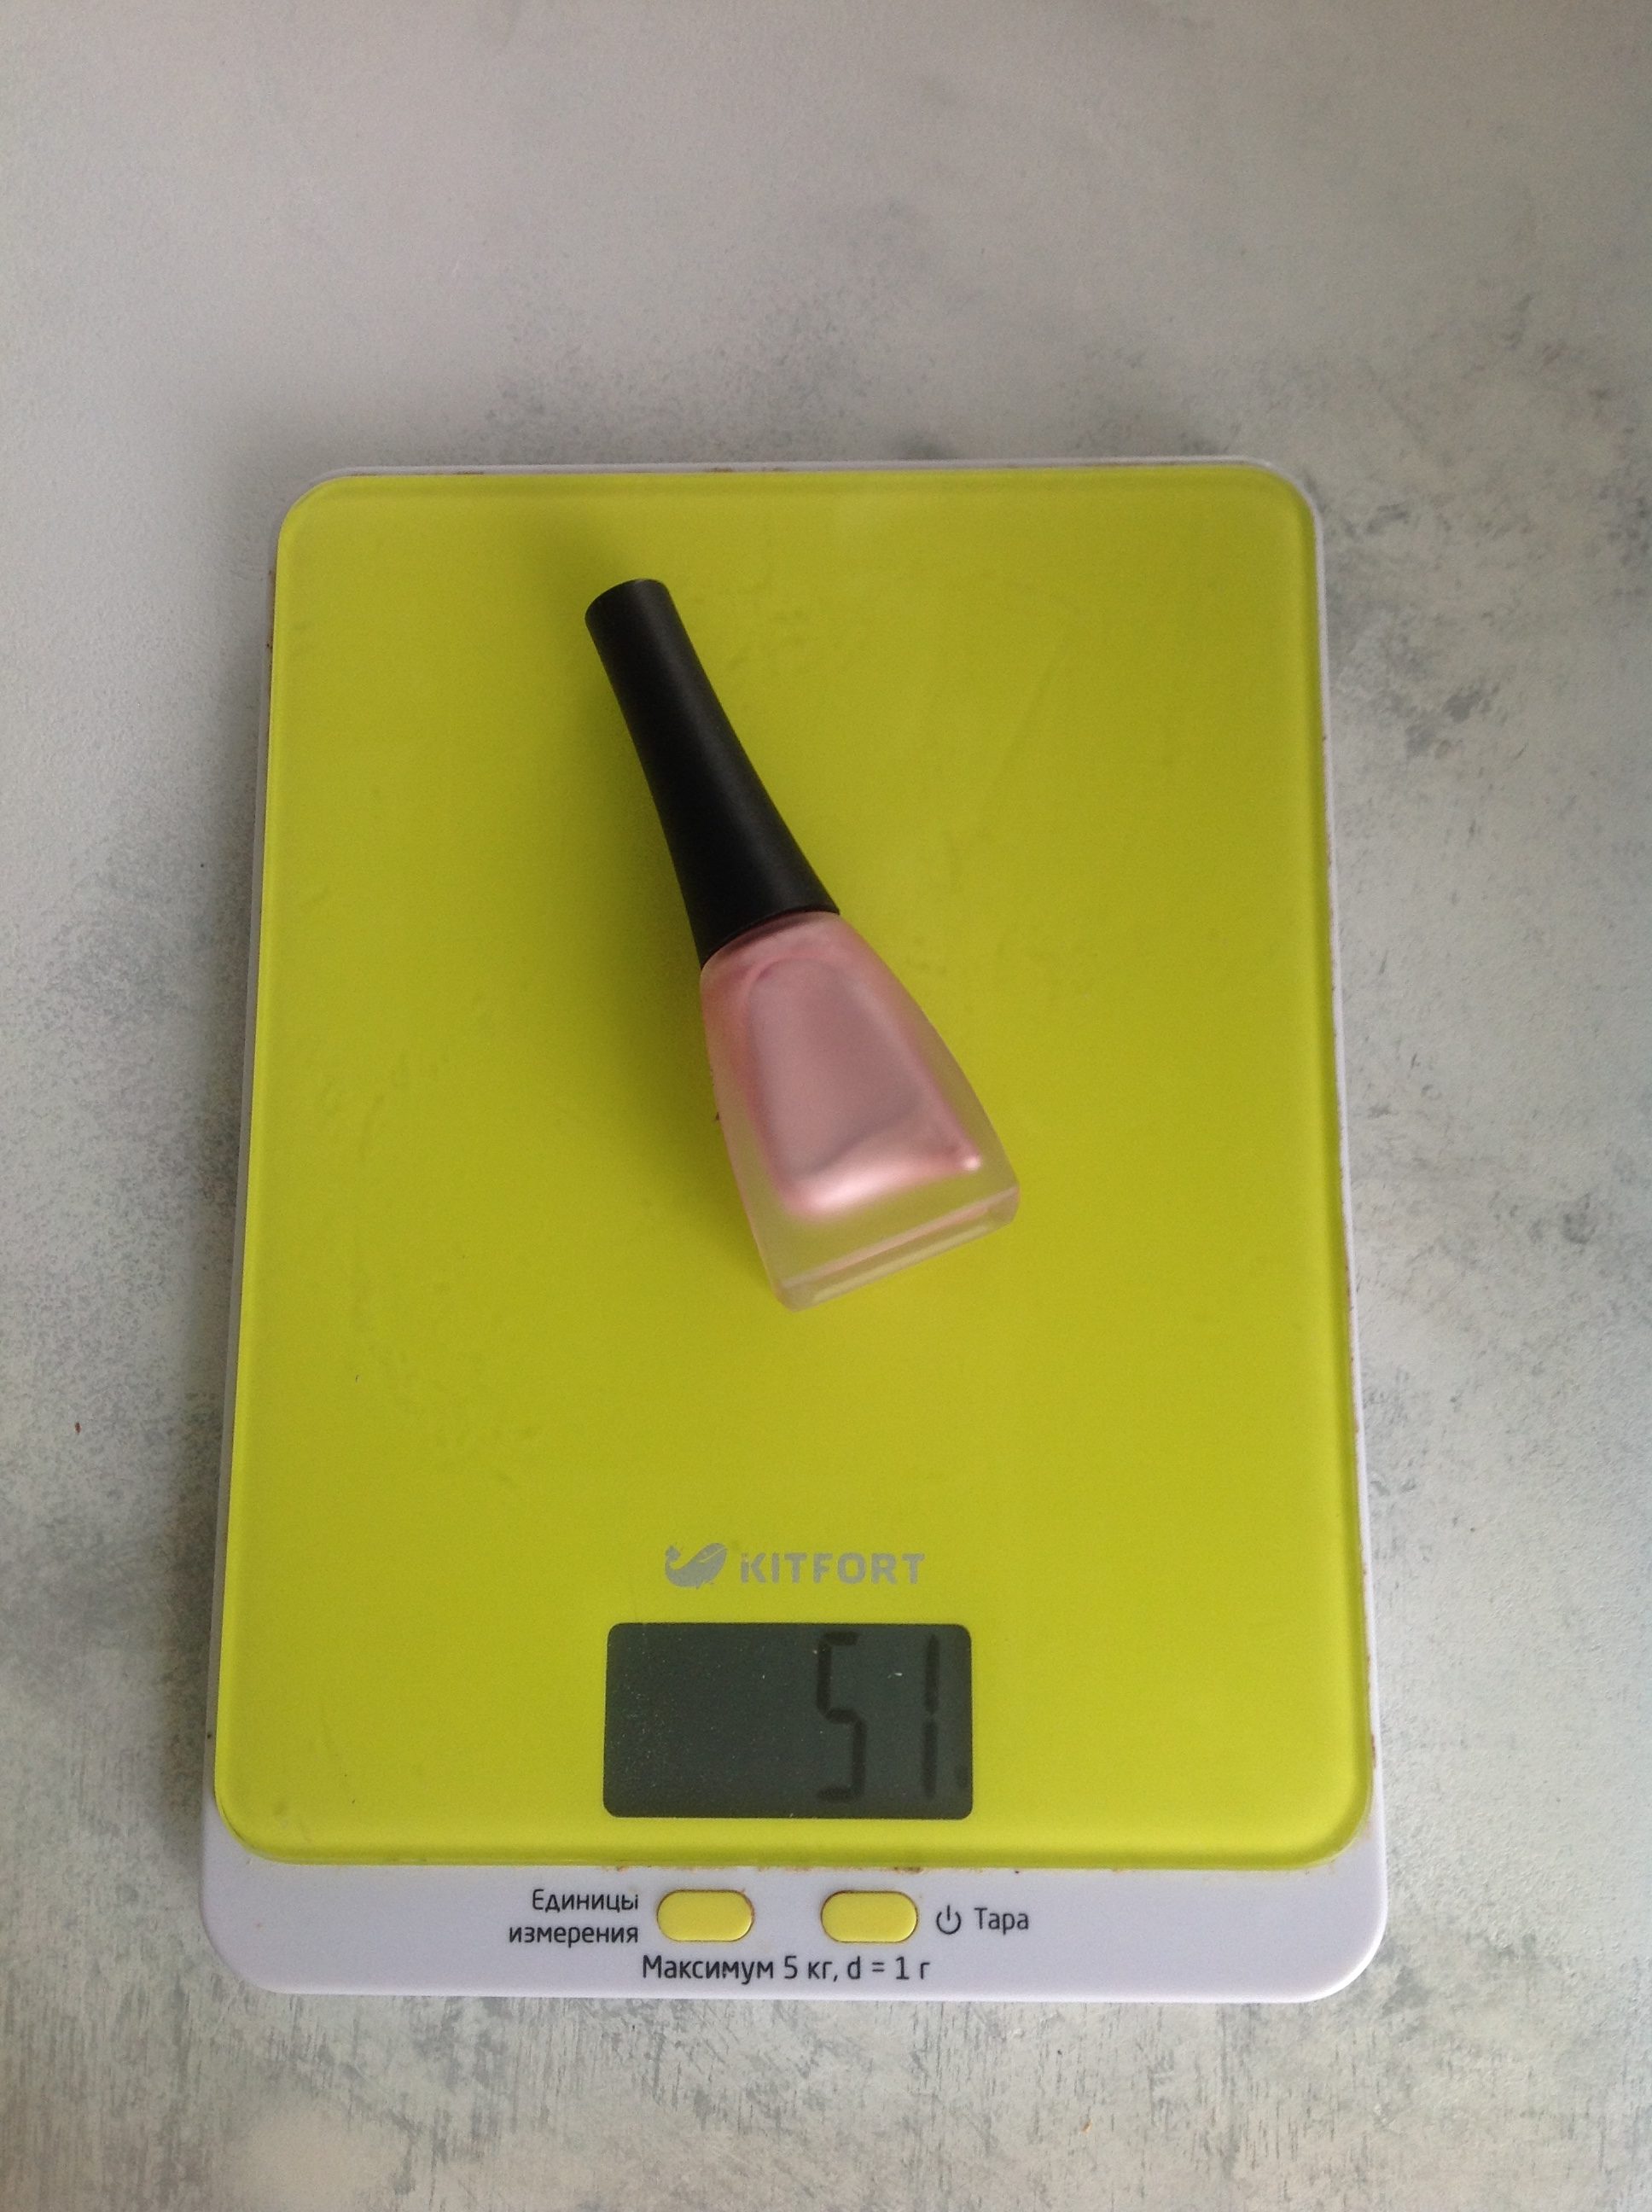 How much does regular nail polish weigh?